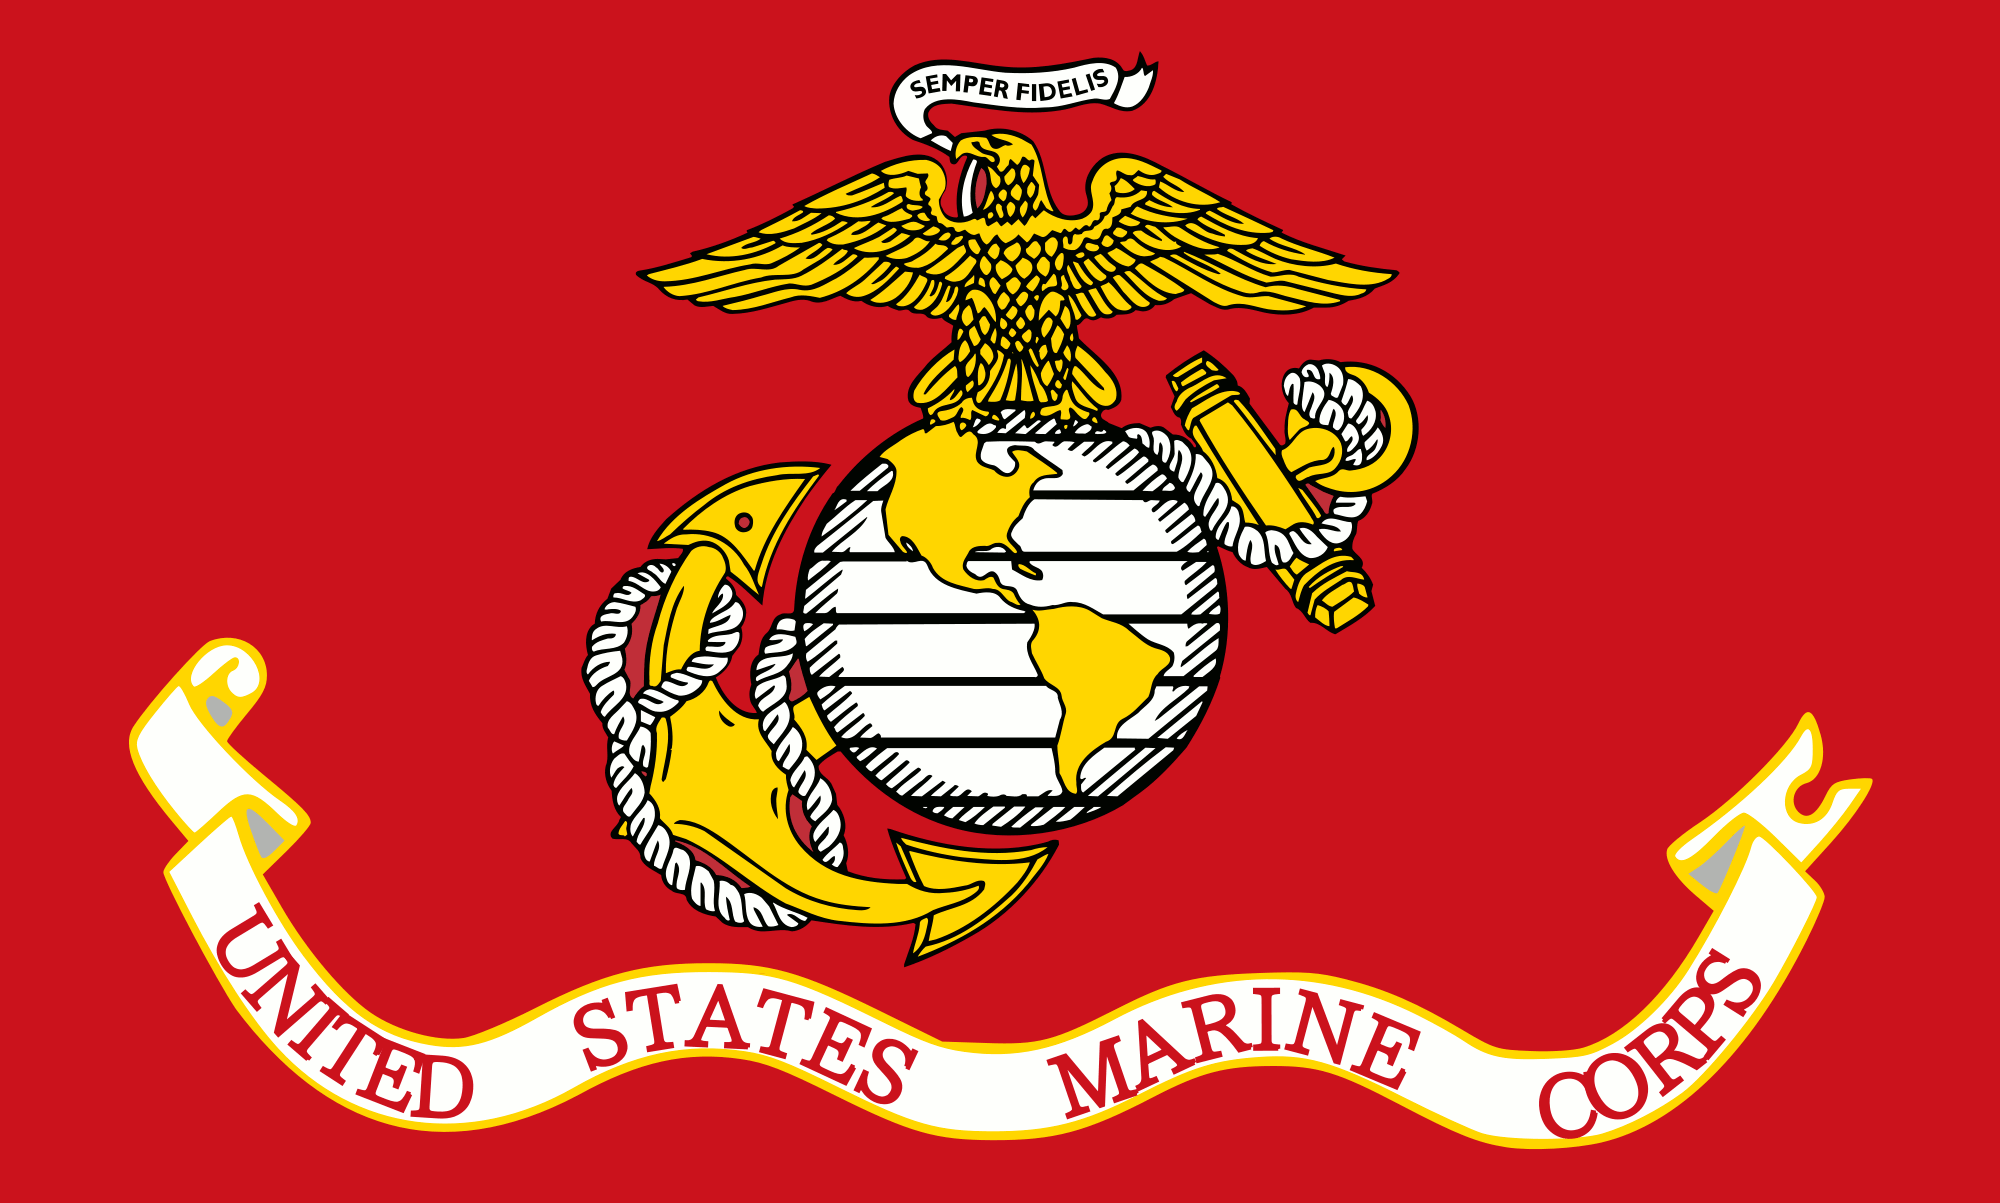 United States Marine Corps Wallpapers - Wallpaper Cave